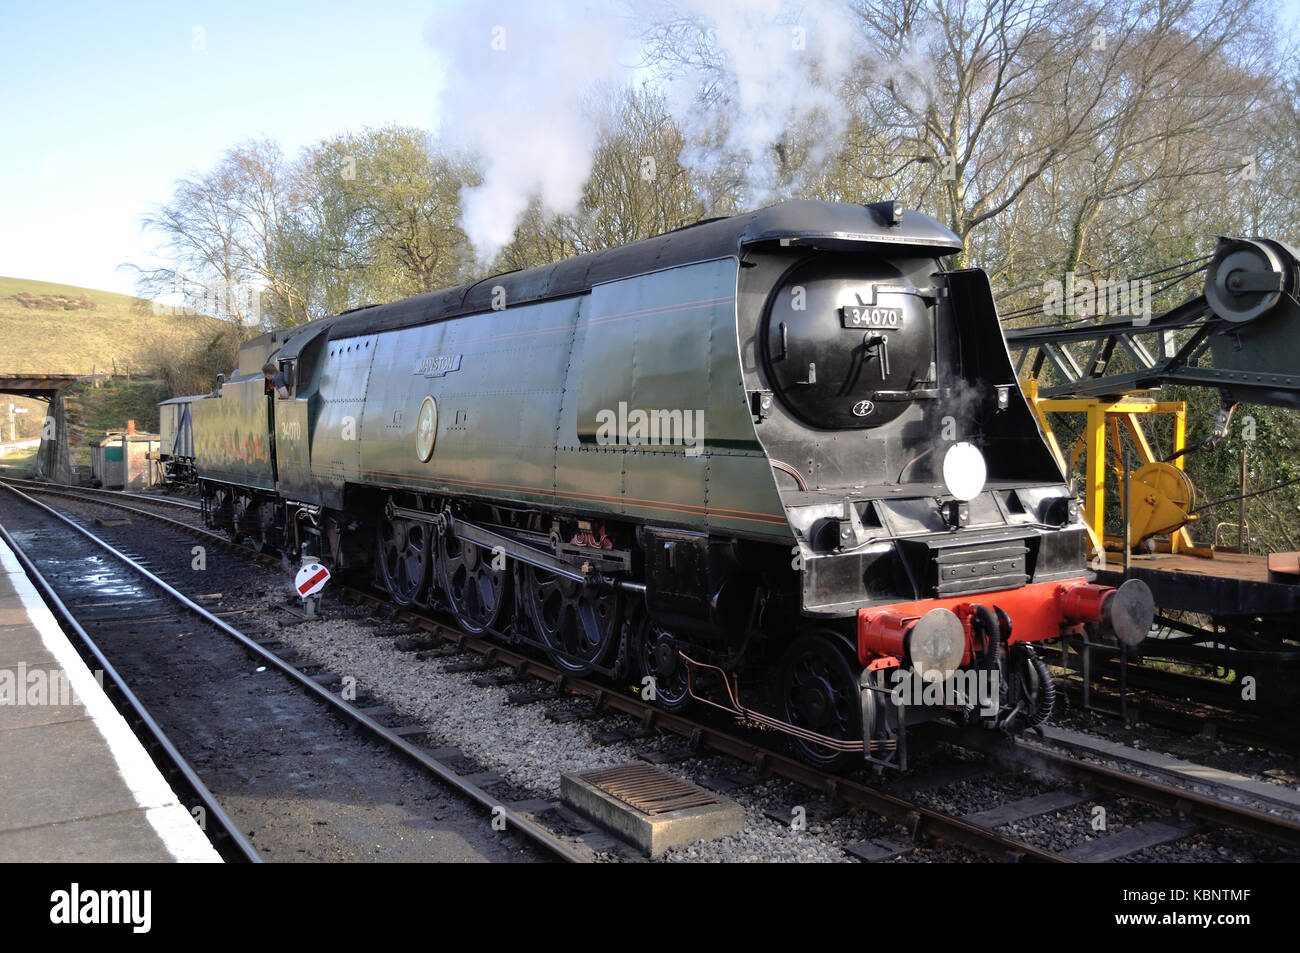 Preserved Battle of Britain Pacific no. 34070 Manston runs round its train at Norden Station on the Swanage Railway in Dorset. Stock Photo